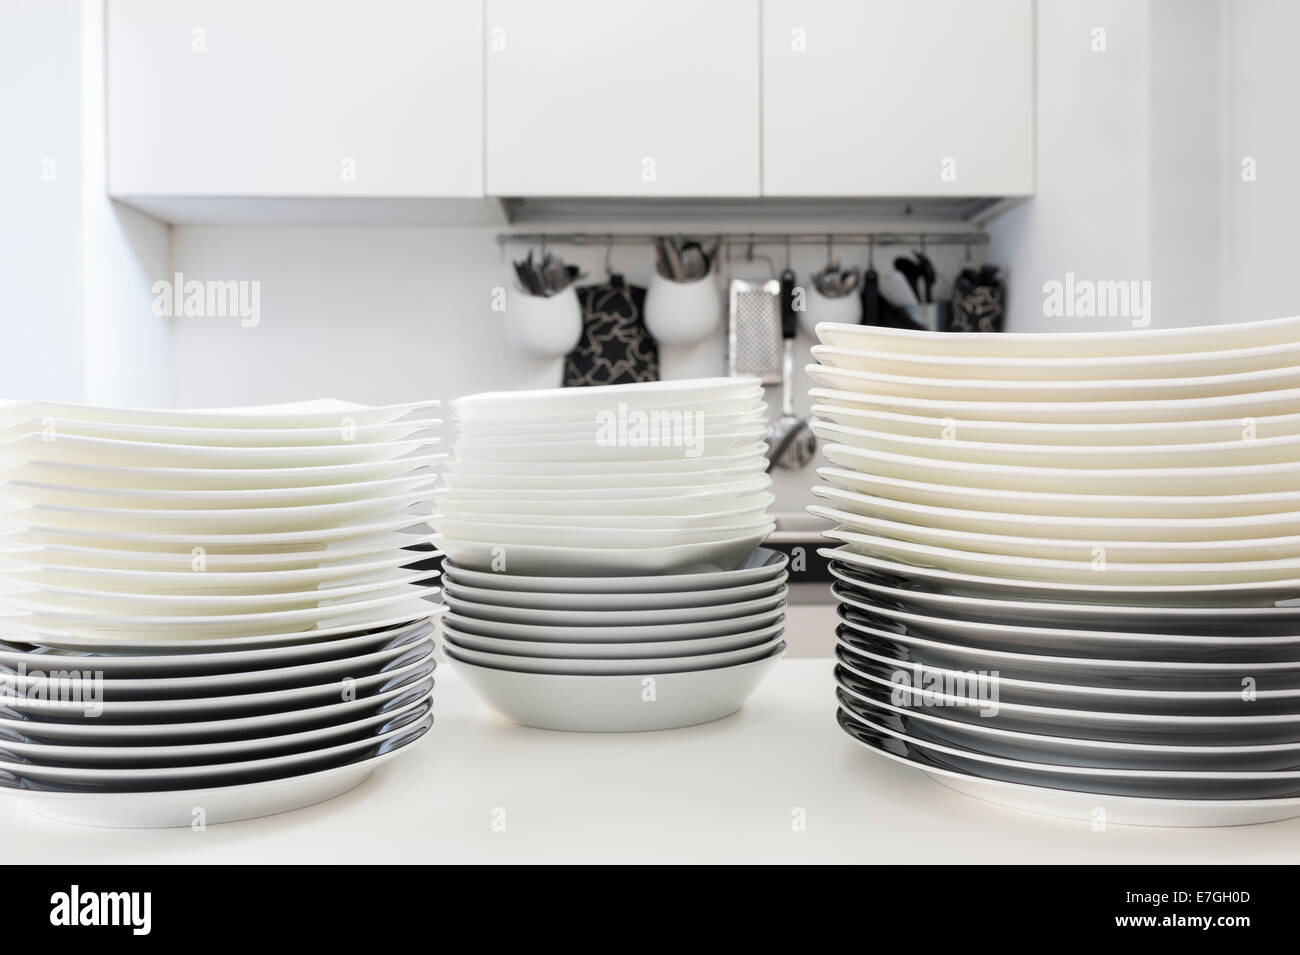 stacks of clean dishes on the kitchen table Stock Photo